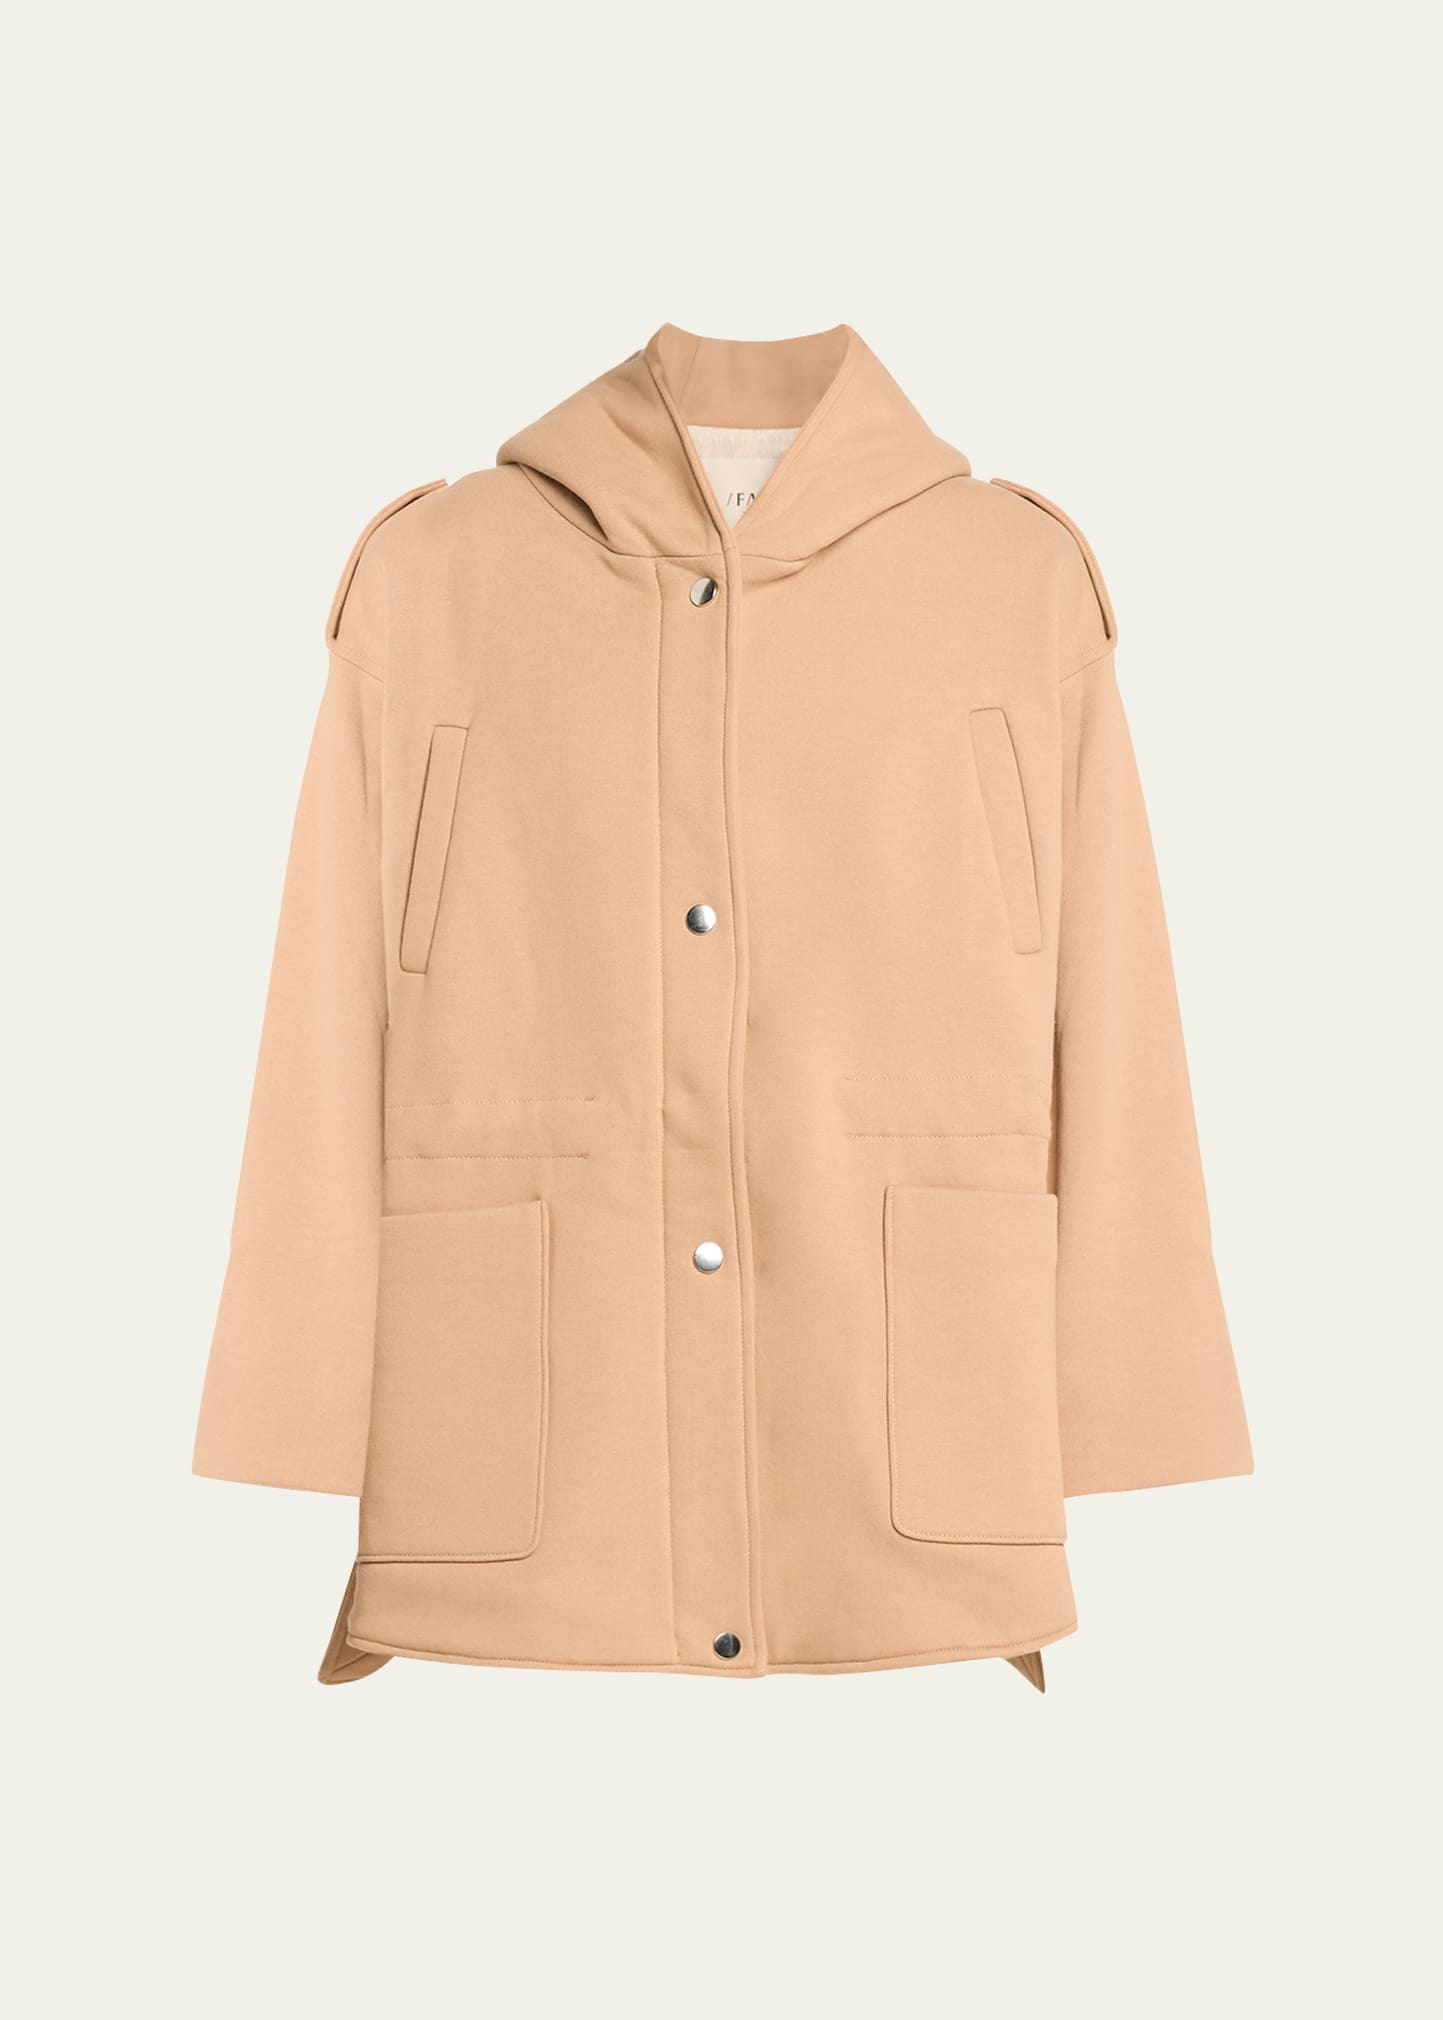 Faz Ruby Hooded Top Coat With Drawcord Waist In Camel